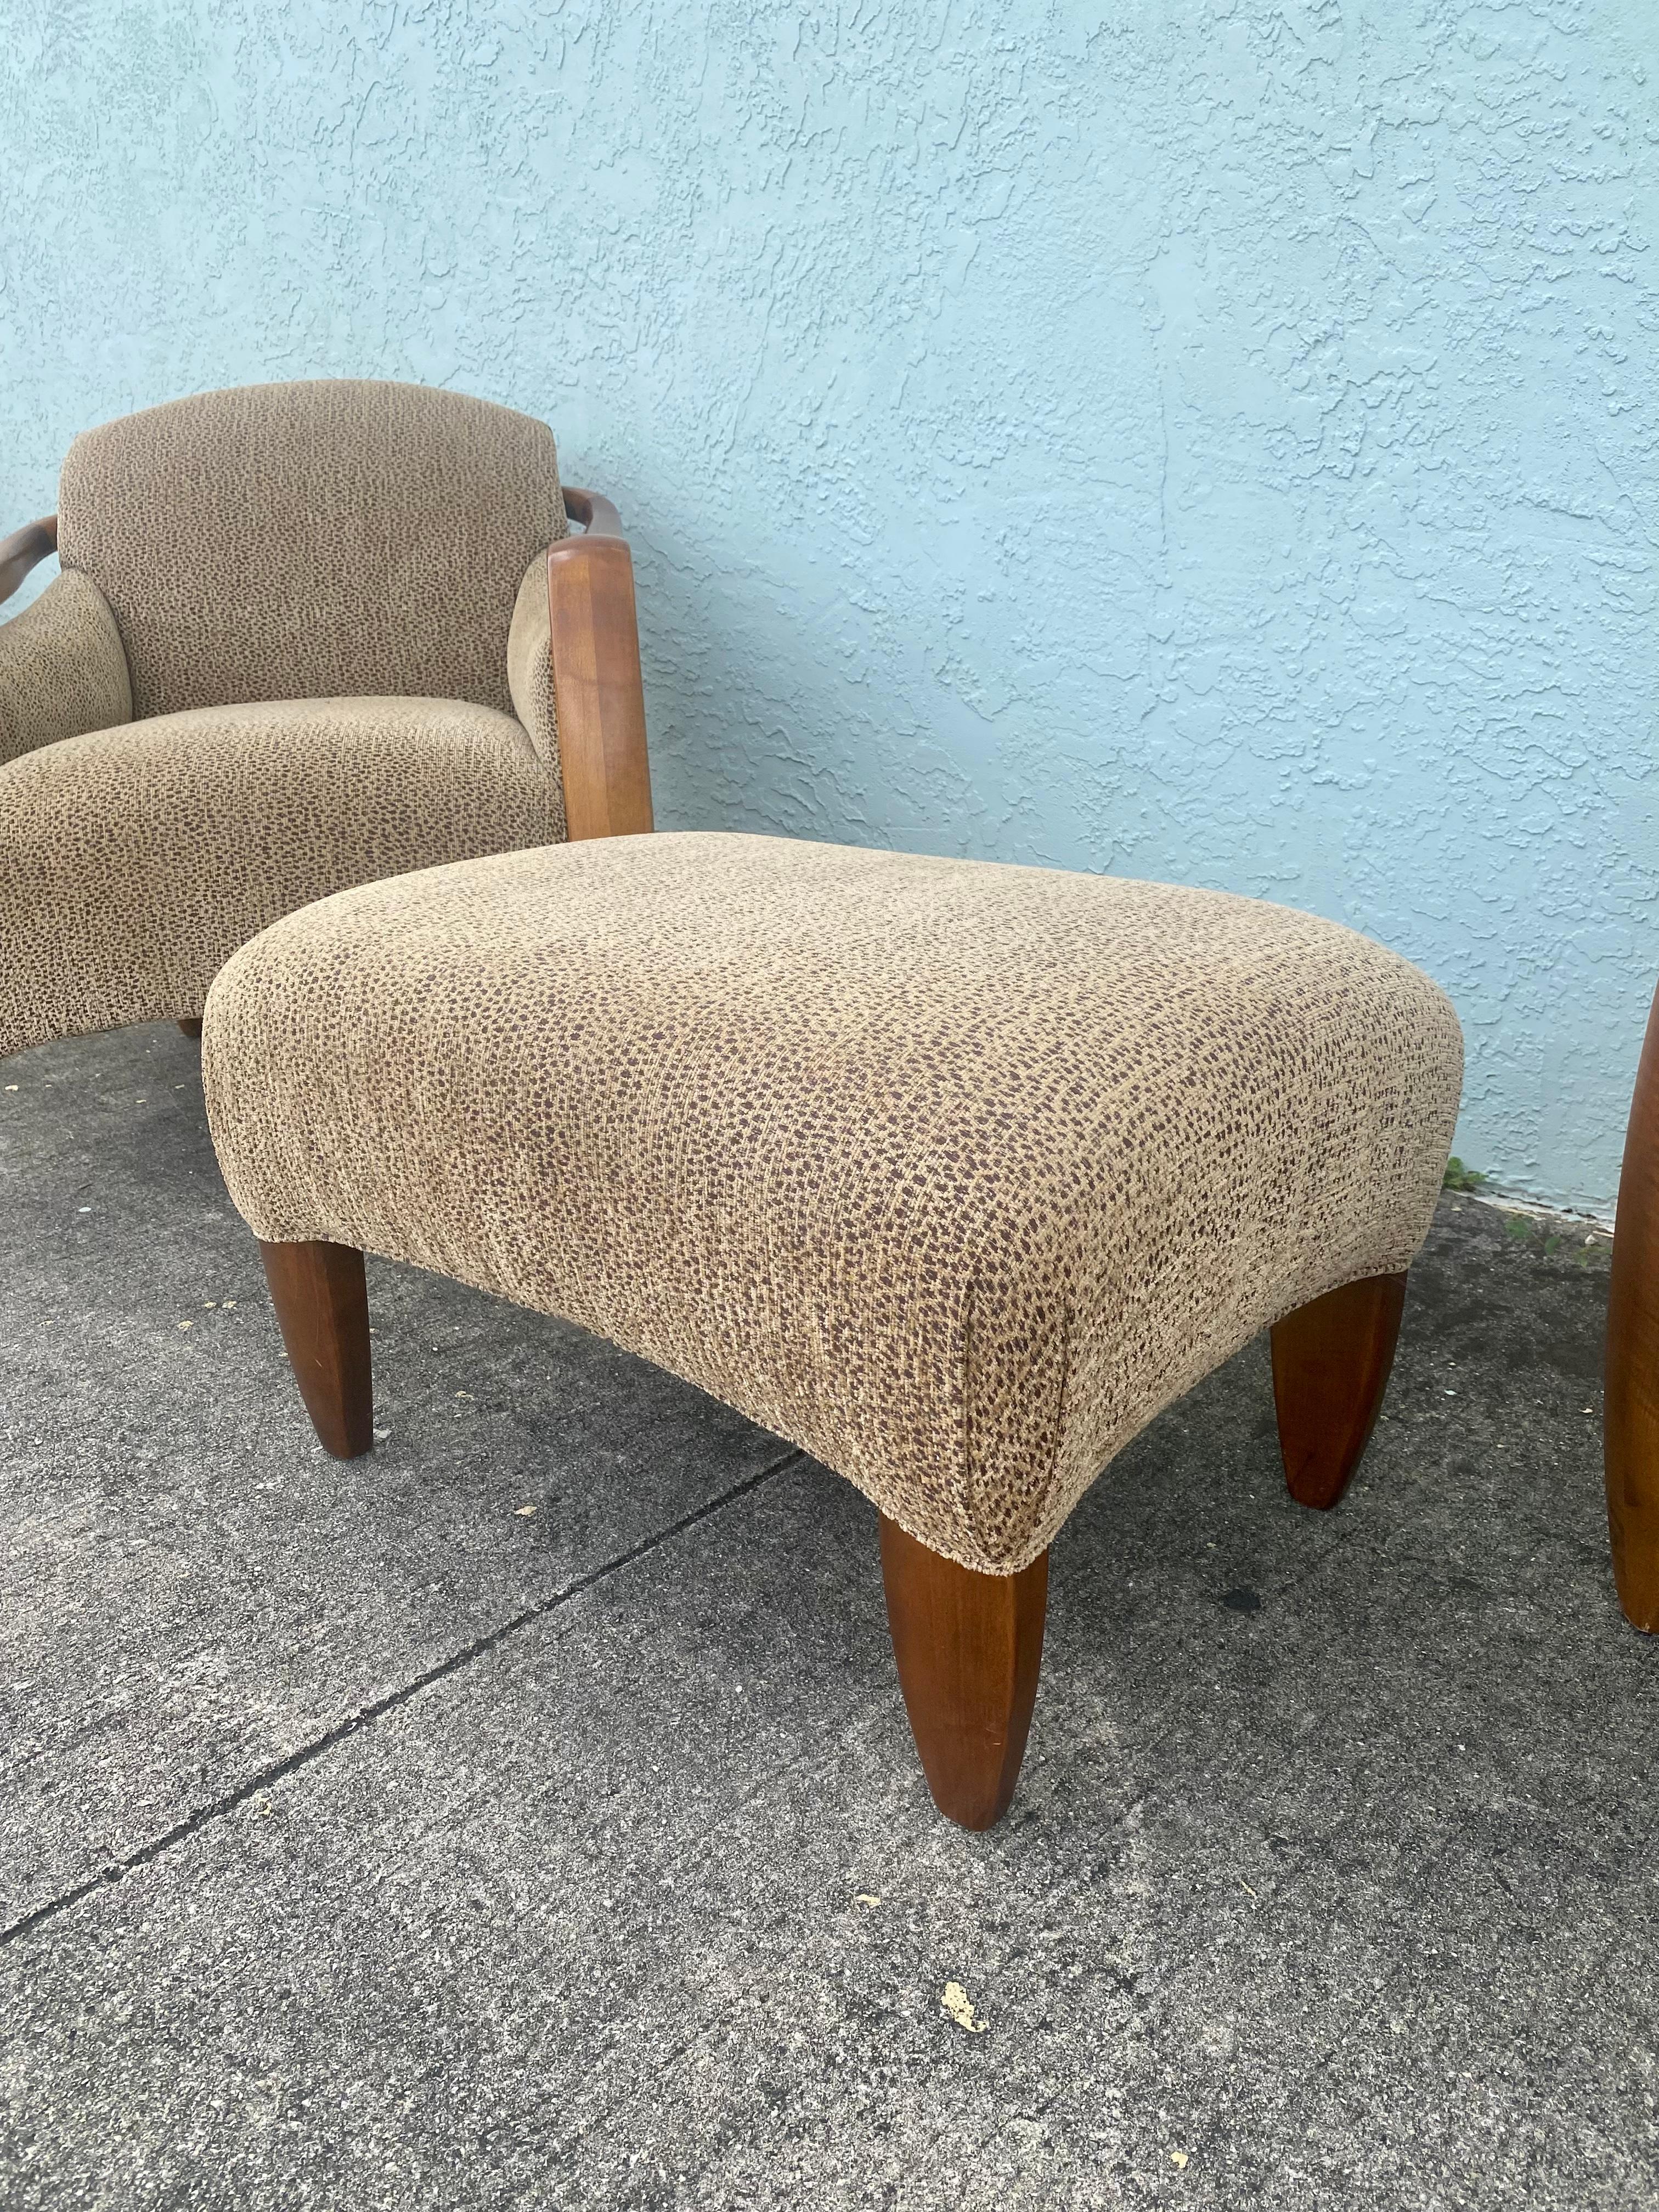 1980s Sculptural Leopard Tiger Wood Chairs and Ottoman, Set of 3 For Sale 2